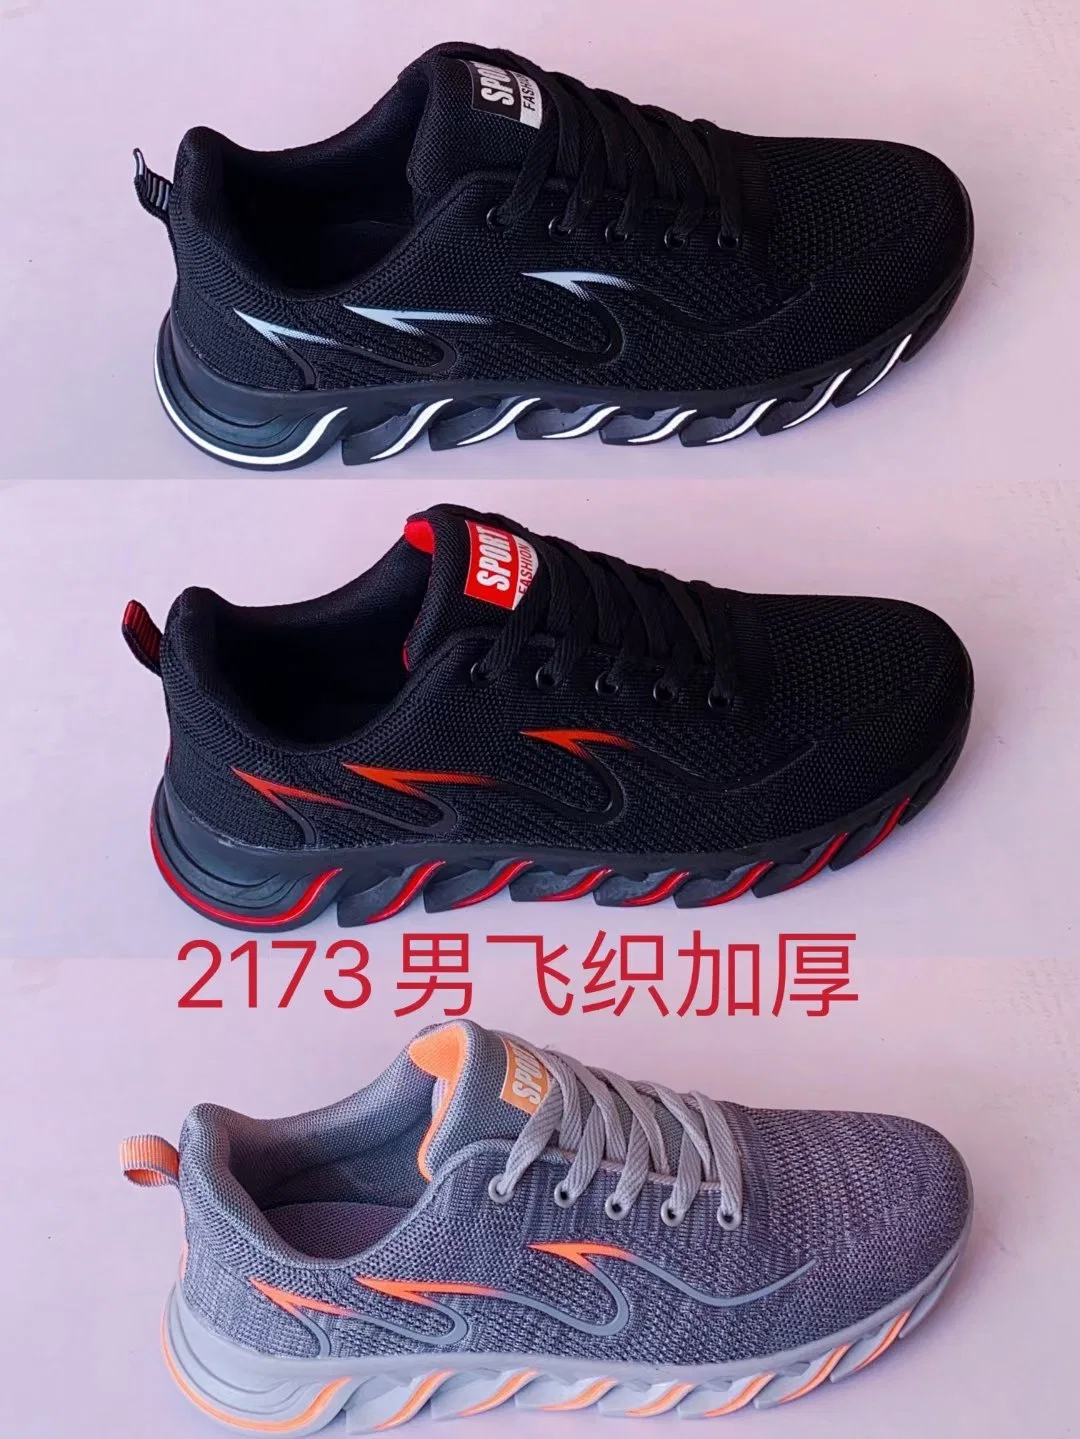 New Style Fashion Special Design Men and Women Footwear Shoes, China Manufacture High Quality Comfortable Breathable Casual Shoes Running Leisure Shoes